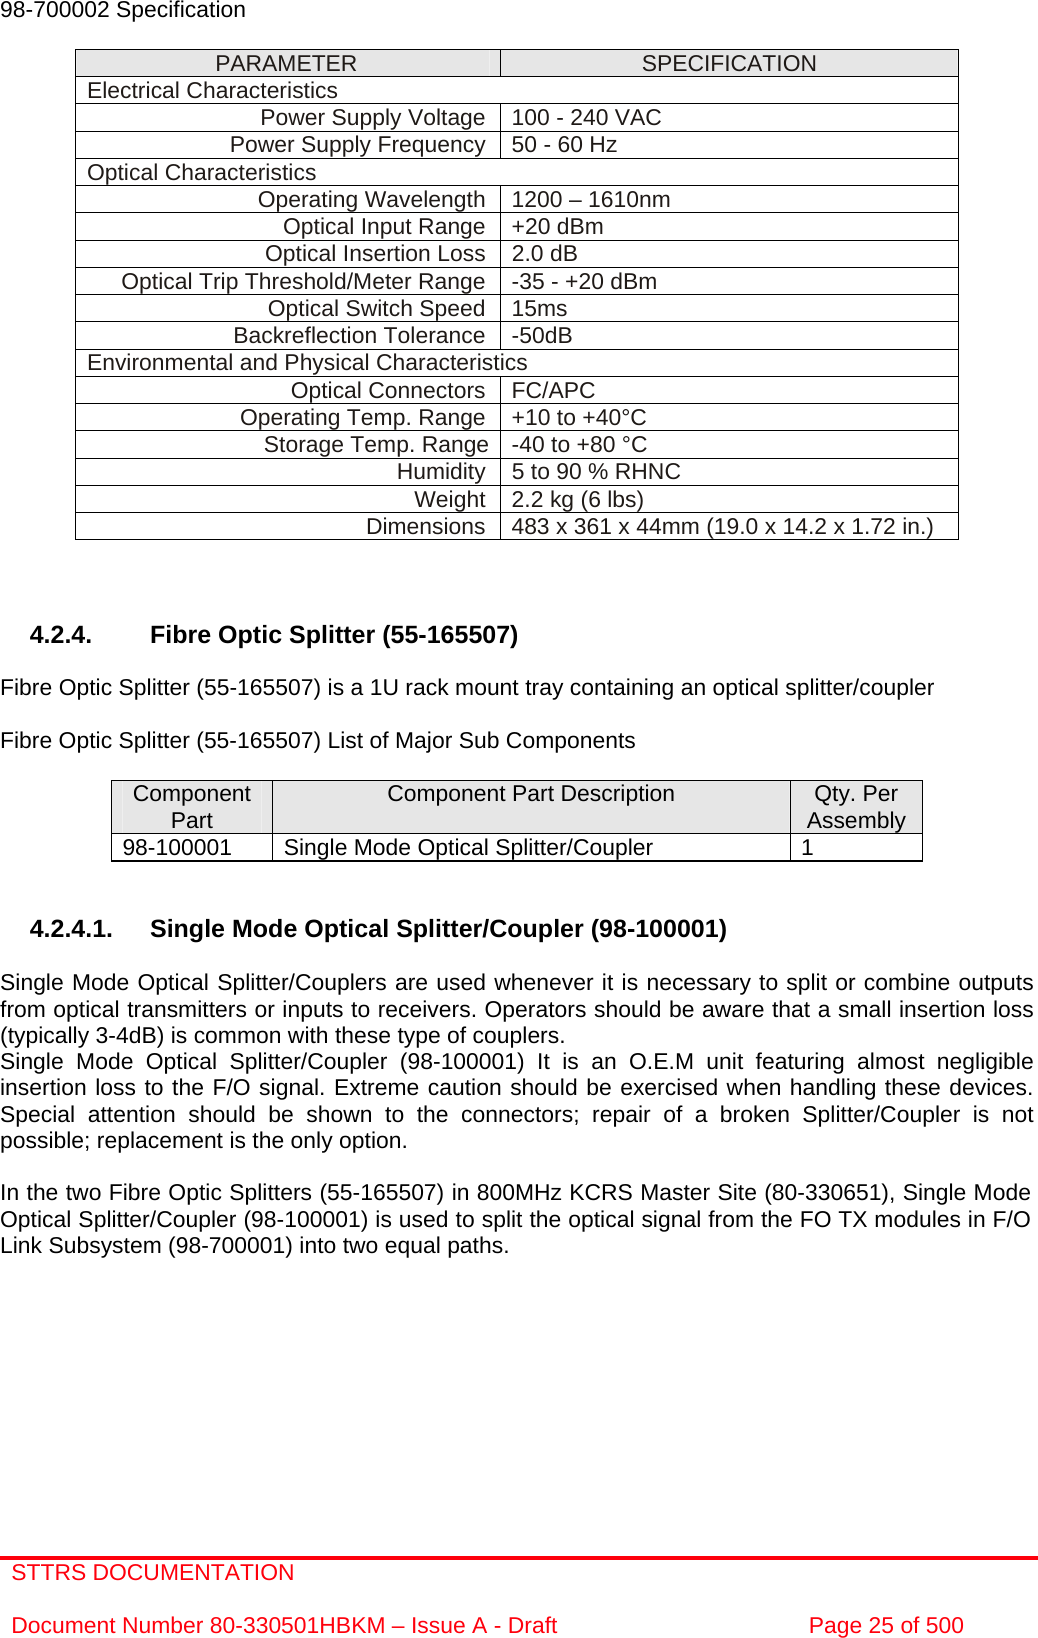 STTRS DOCUMENTATION  Document Number 80-330501HBKM – Issue A - Draft  Page 25 of 500   98-700002 Specification   PARAMETER  SPECIFICATION Electrical Characteristics Power Supply Voltage  100 - 240 VAC Power Supply Frequency 50 - 60 Hz Optical Characteristics Operating Wavelength  1200 – 1610nm Optical Input Range  +20 dBm Optical Insertion Loss  2.0 dB Optical Trip Threshold/Meter Range  -35 - +20 dBm Optical Switch Speed  15ms Backreflection Tolerance  -50dB Environmental and Physical Characteristics Optical Connectors  FC/APC Operating Temp. Range  +10 to +40°C Storage Temp. Range  -40 to +80 °C   Humidity  5 to 90 % RHNC Weight  2.2 kg (6 lbs) Dimensions  483 x 361 x 44mm (19.0 x 14.2 x 1.72 in.)    4.2.4.  Fibre Optic Splitter (55-165507)  Fibre Optic Splitter (55-165507) is a 1U rack mount tray containing an optical splitter/coupler  Fibre Optic Splitter (55-165507) List of Major Sub Components  Component Part  Component Part Description  Qty. Per Assembly 98-100001  Single Mode Optical Splitter/Coupler  1   4.2.4.1.  Single Mode Optical Splitter/Coupler (98-100001)  Single Mode Optical Splitter/Couplers are used whenever it is necessary to split or combine outputs from optical transmitters or inputs to receivers. Operators should be aware that a small insertion loss (typically 3-4dB) is common with these type of couplers.  Single Mode Optical Splitter/Coupler (98-100001) It is an O.E.M unit featuring almost negligible insertion loss to the F/O signal. Extreme caution should be exercised when handling these devices. Special attention should be shown to the connectors; repair of a broken Splitter/Coupler is not possible; replacement is the only option.  In the two Fibre Optic Splitters (55-165507) in 800MHz KCRS Master Site (80-330651), Single Mode Optical Splitter/Coupler (98-100001) is used to split the optical signal from the FO TX modules in F/O Link Subsystem (98-700001) into two equal paths. 